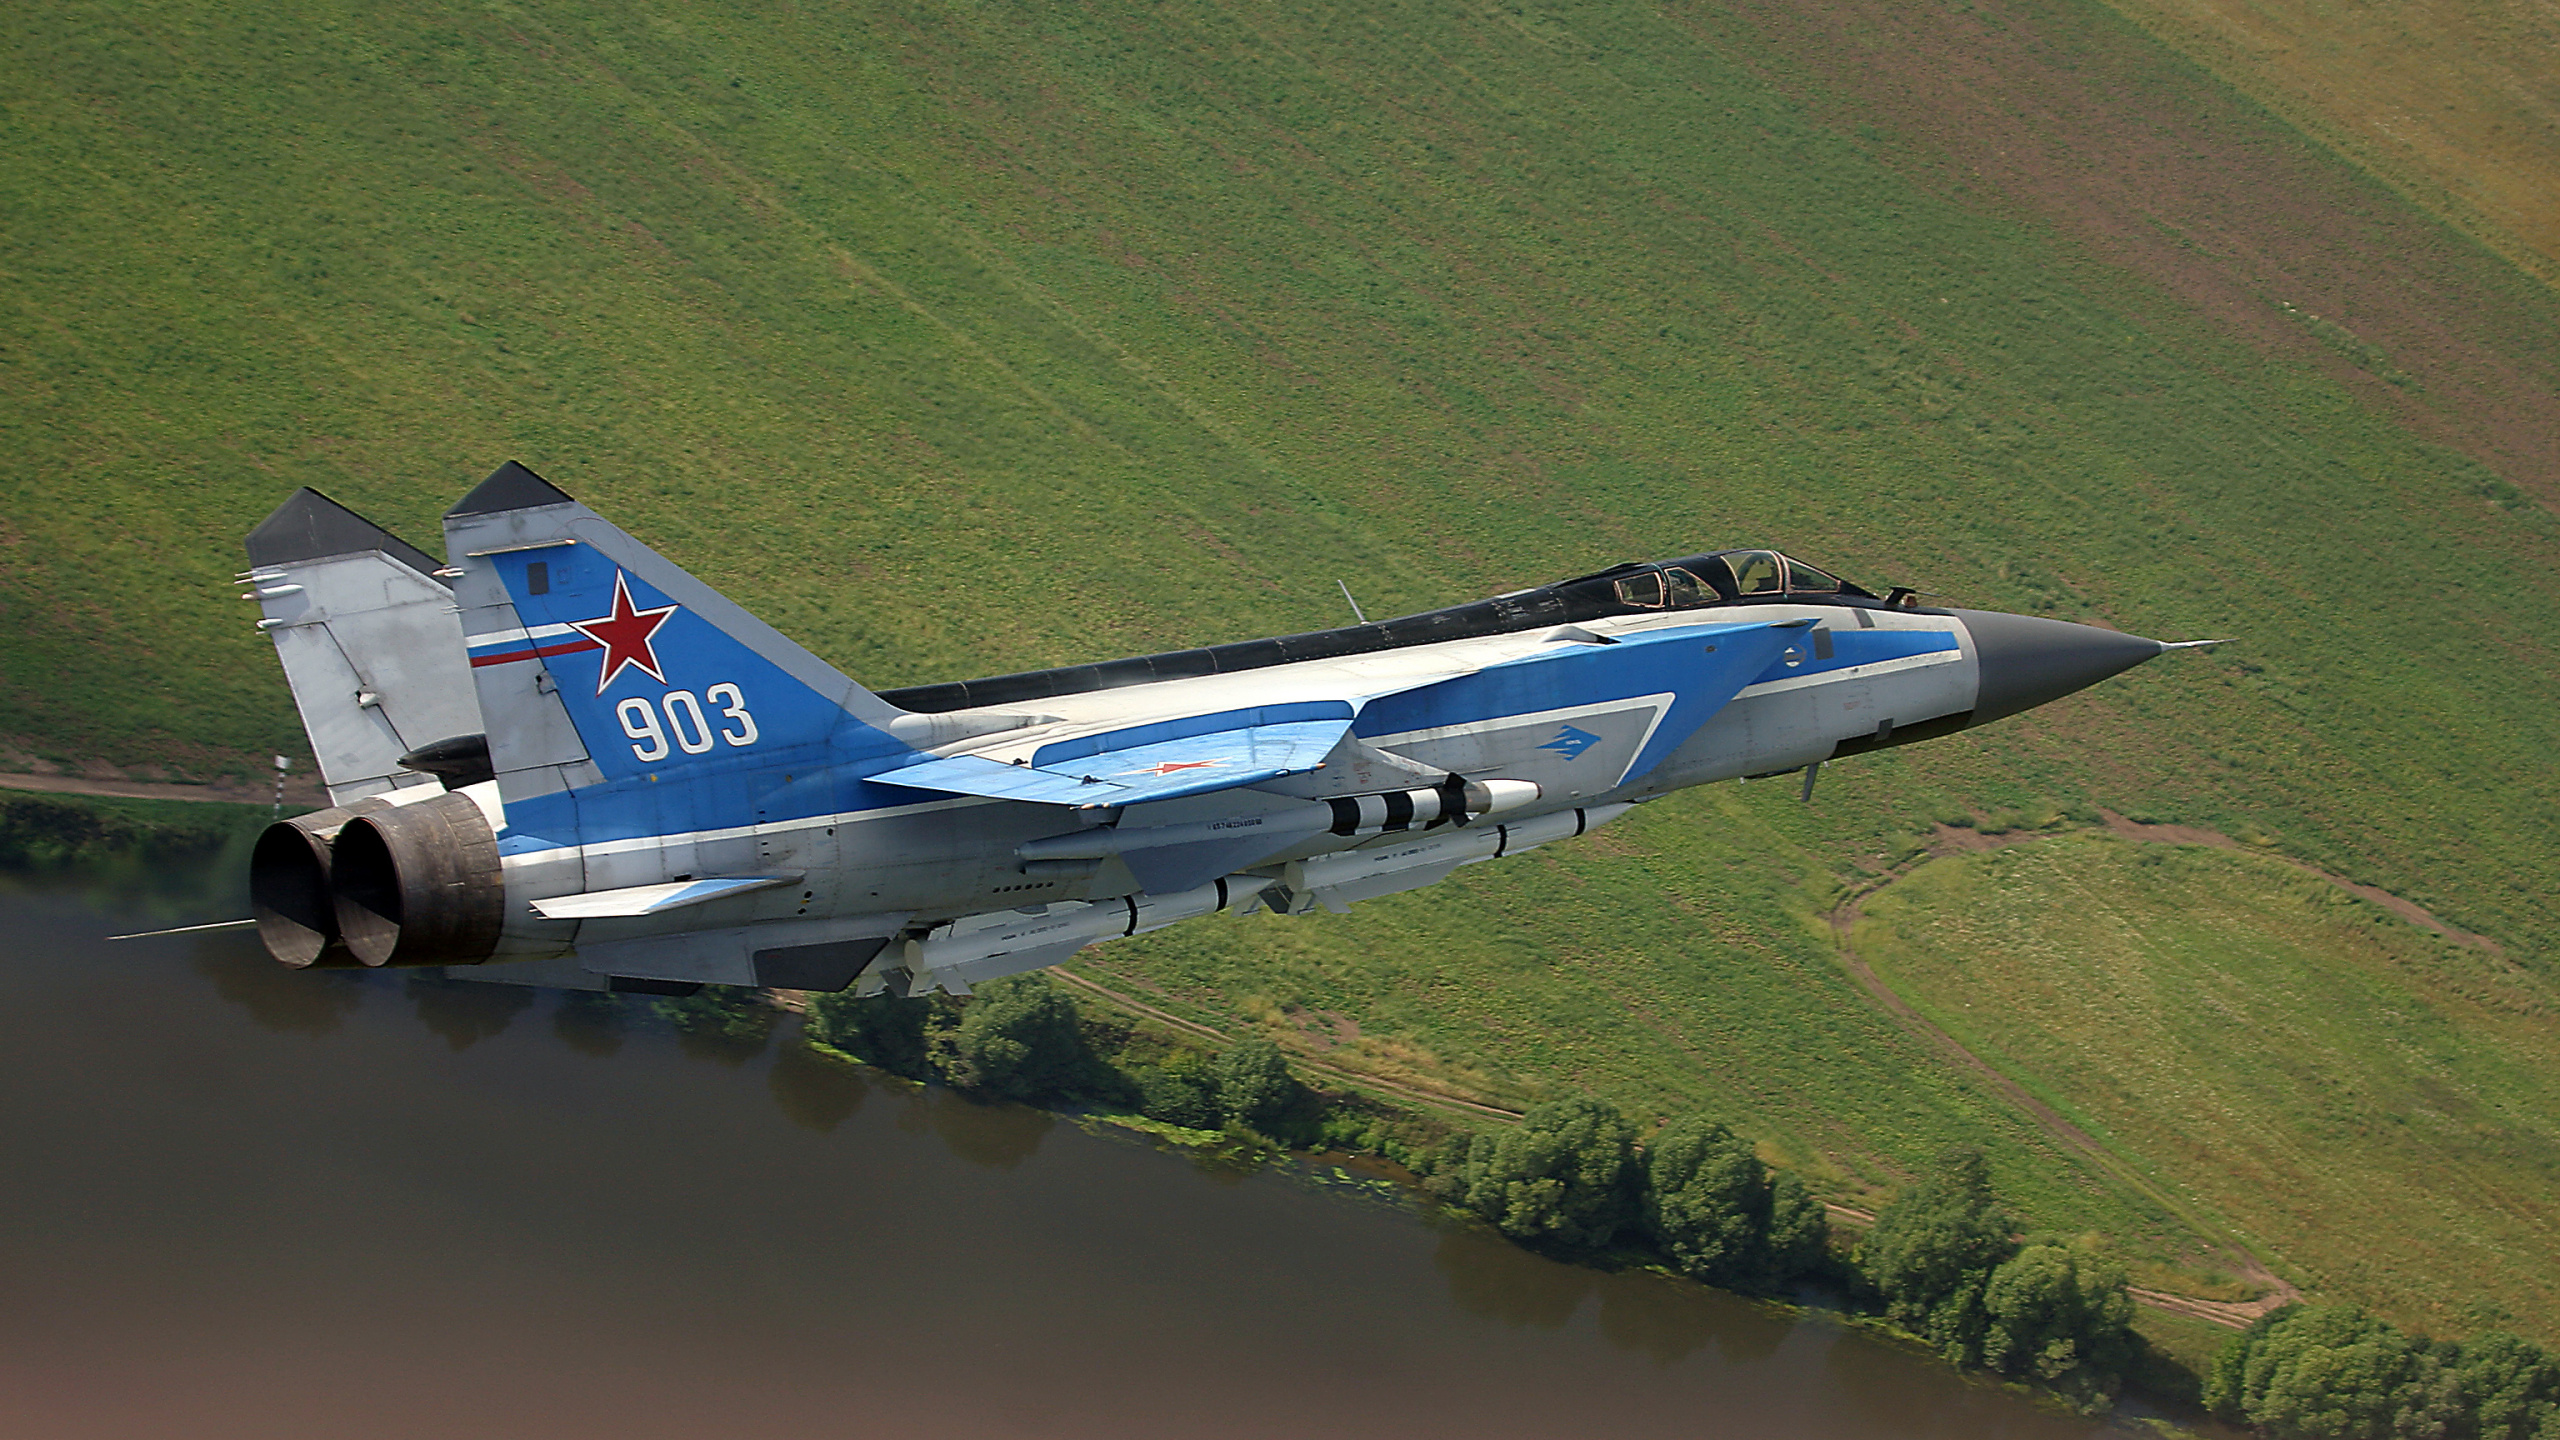 Blue and White Jet Plane Flying Over Green Grass Field During Daytime. Wallpaper in 2560x1440 Resolution